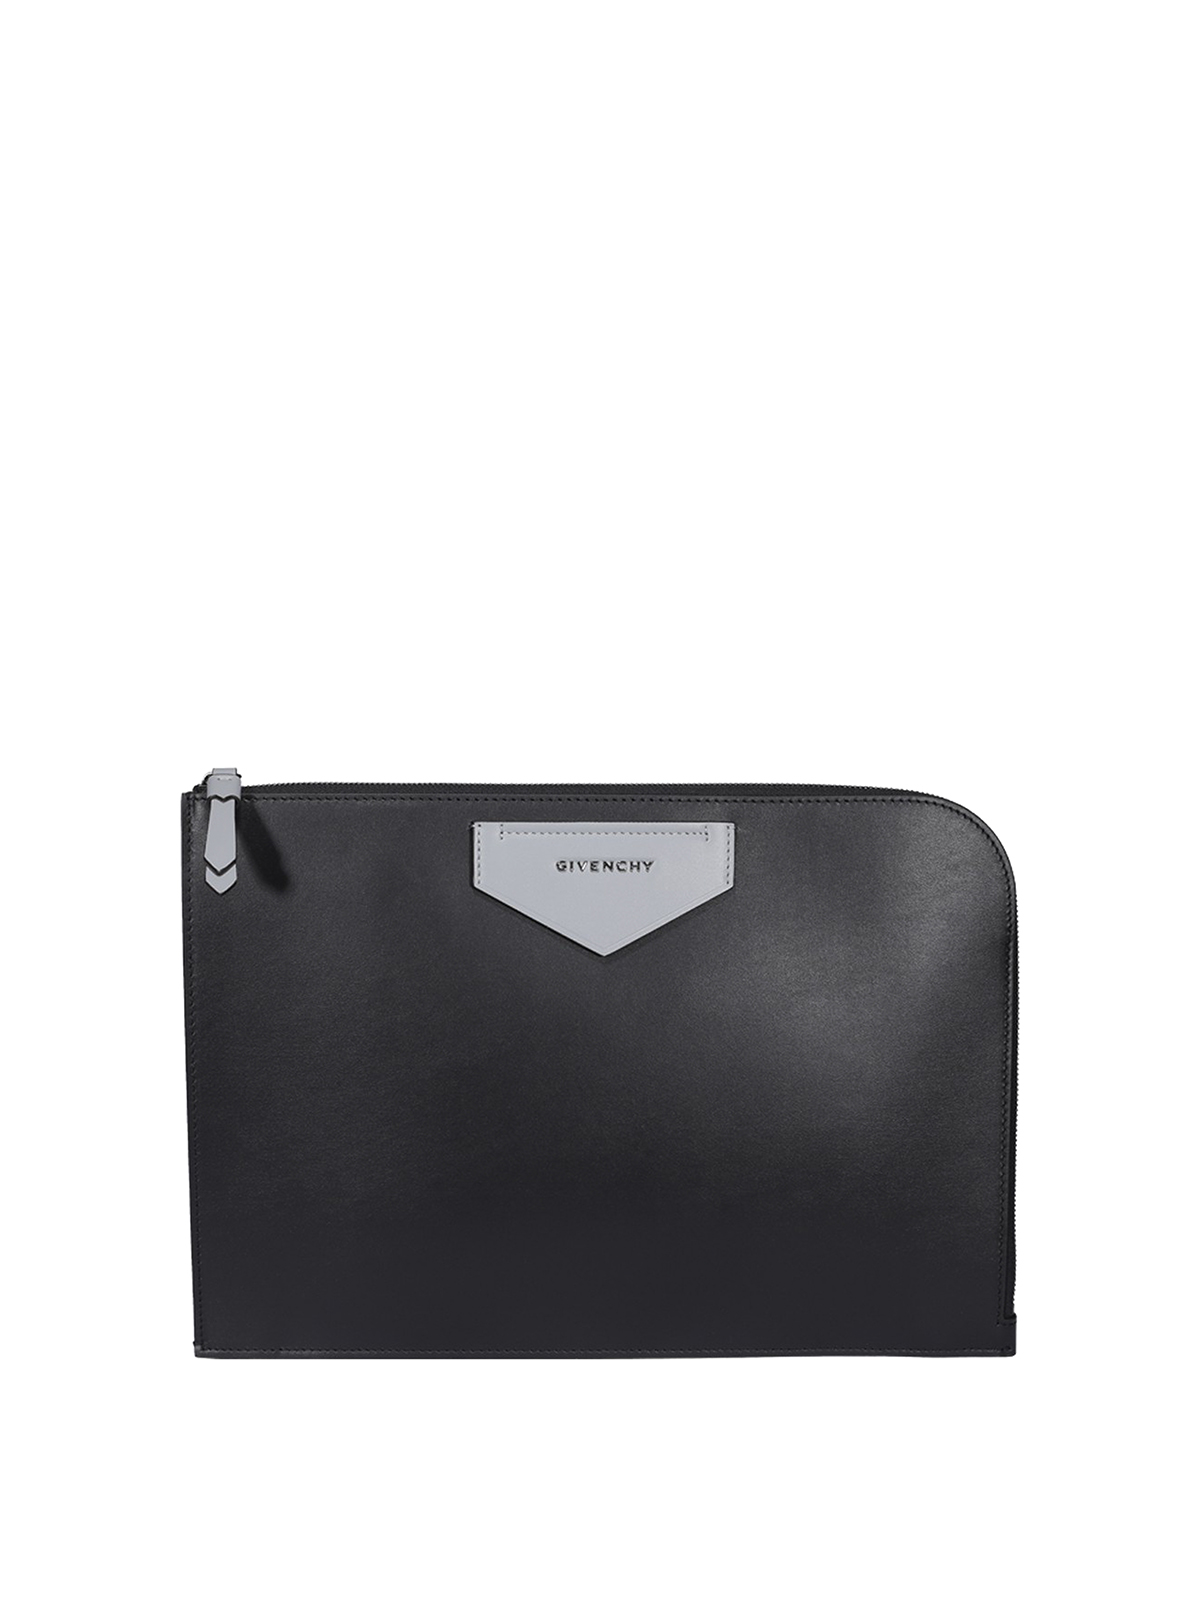 GIVENCHY LEATHER CLUTCH